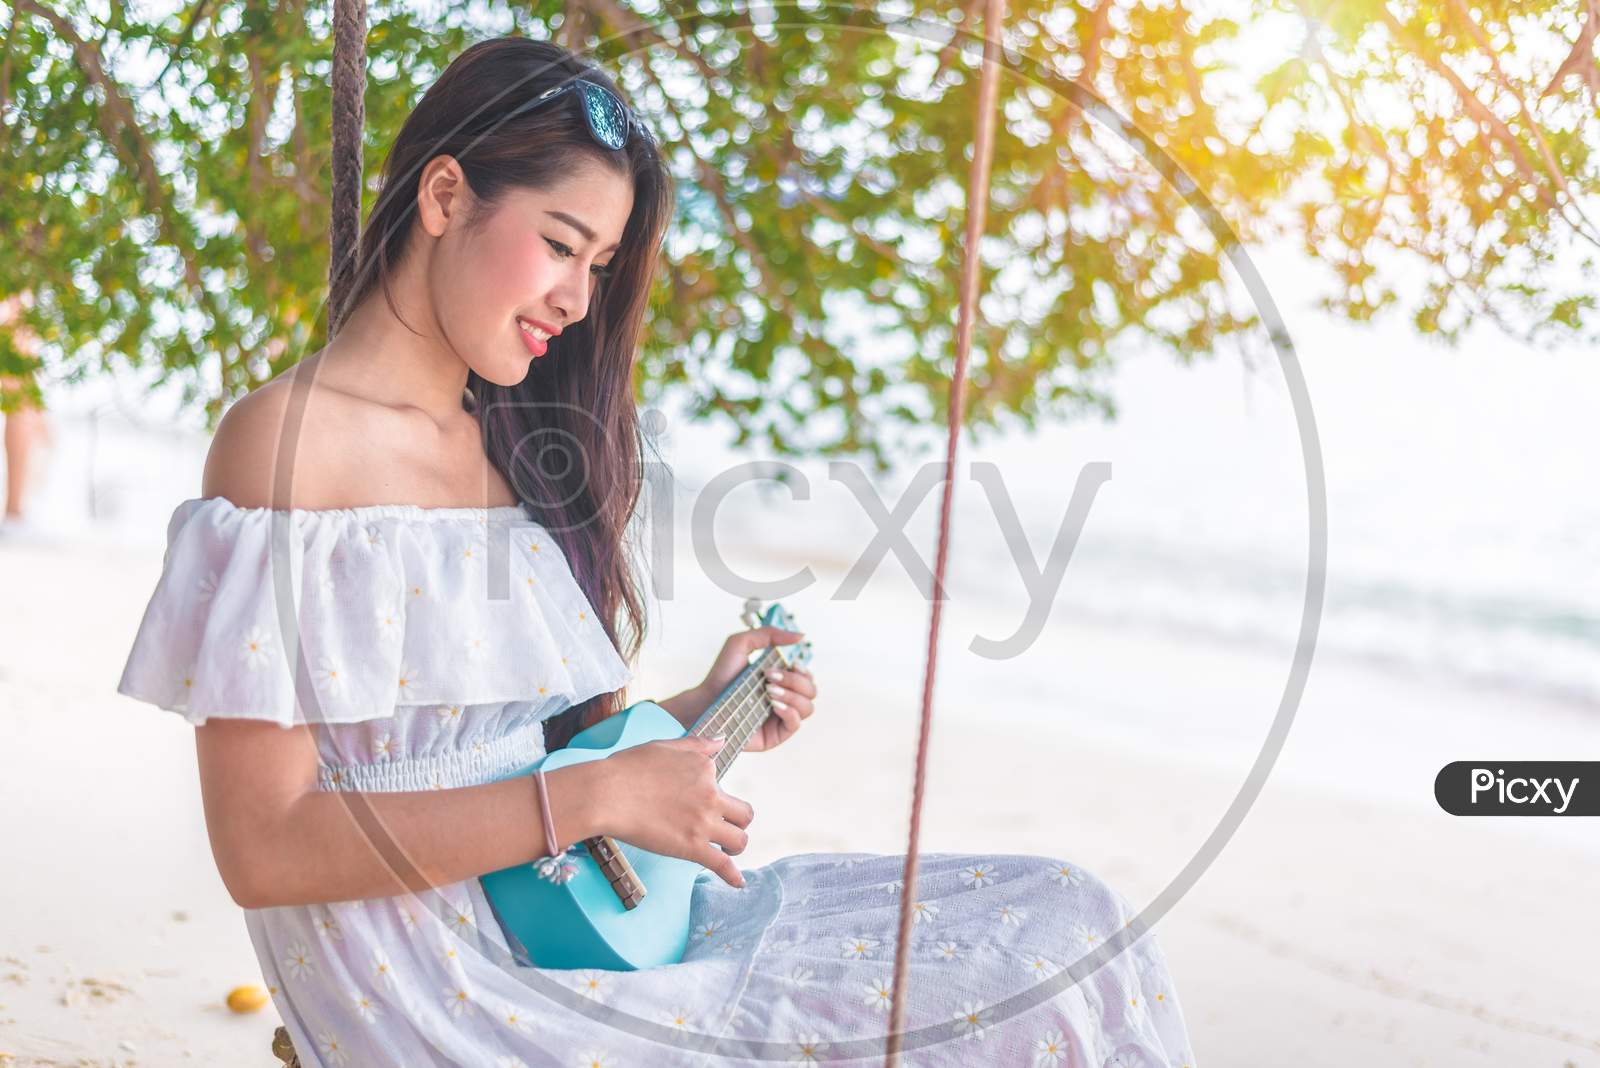 Beautiful Young Asian Woman Playing With Ukulele And Relax On The Beach. People And Holiday Concept. Vacation And Happiness Life Concept. Summer And Beach Theme.